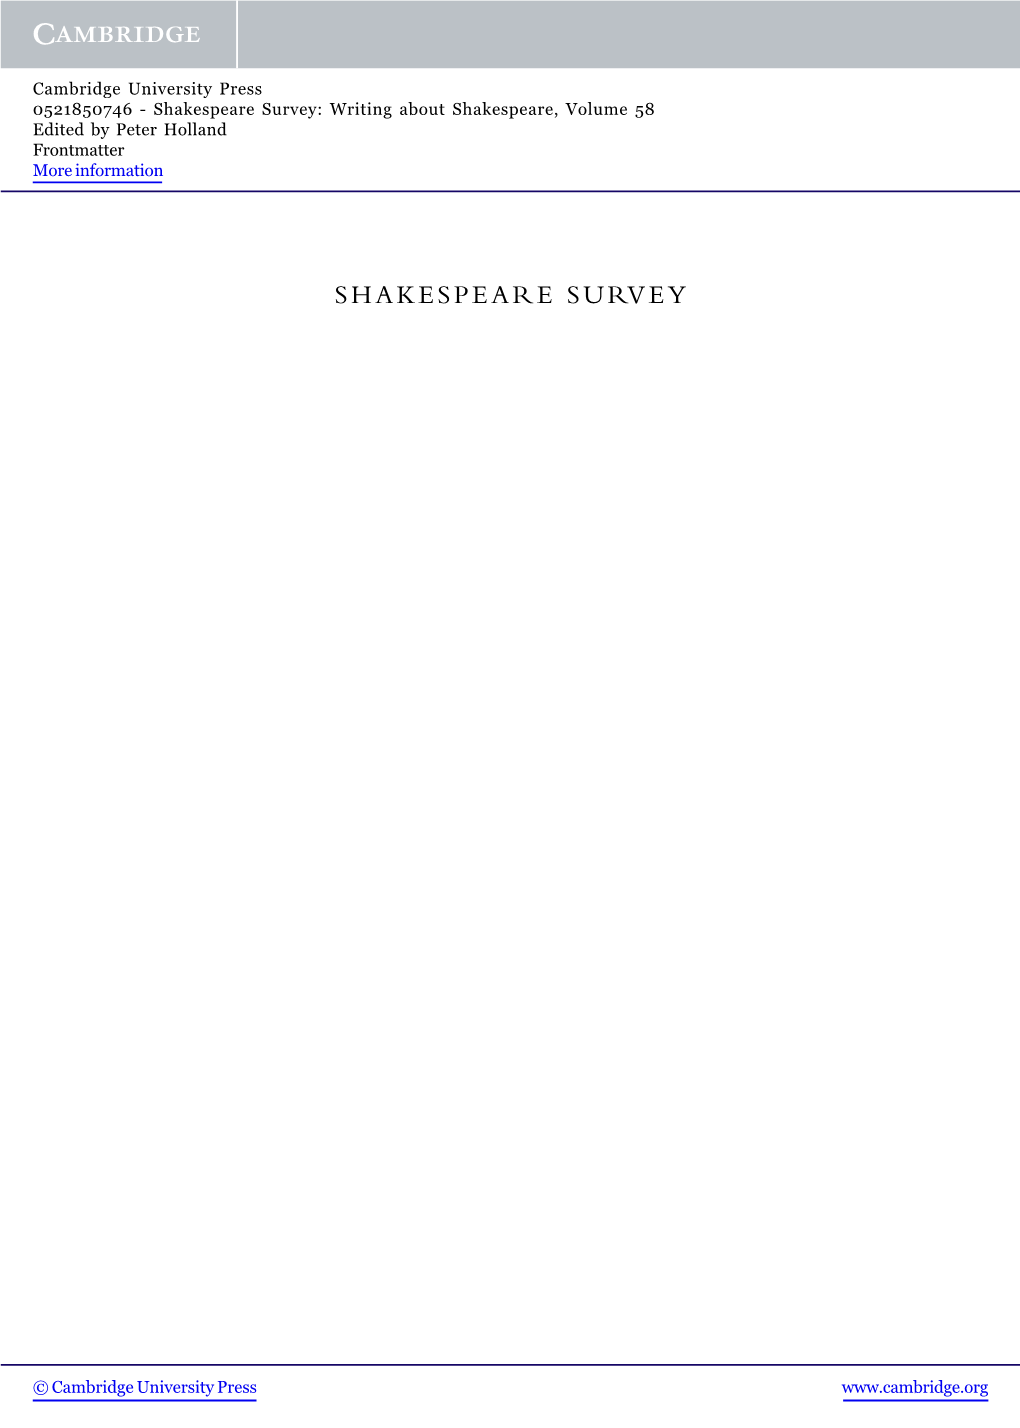 Shakespeare Survey: Writing About Shakespeare, Volume 58 Edited by Peter Holland Frontmatter More Information